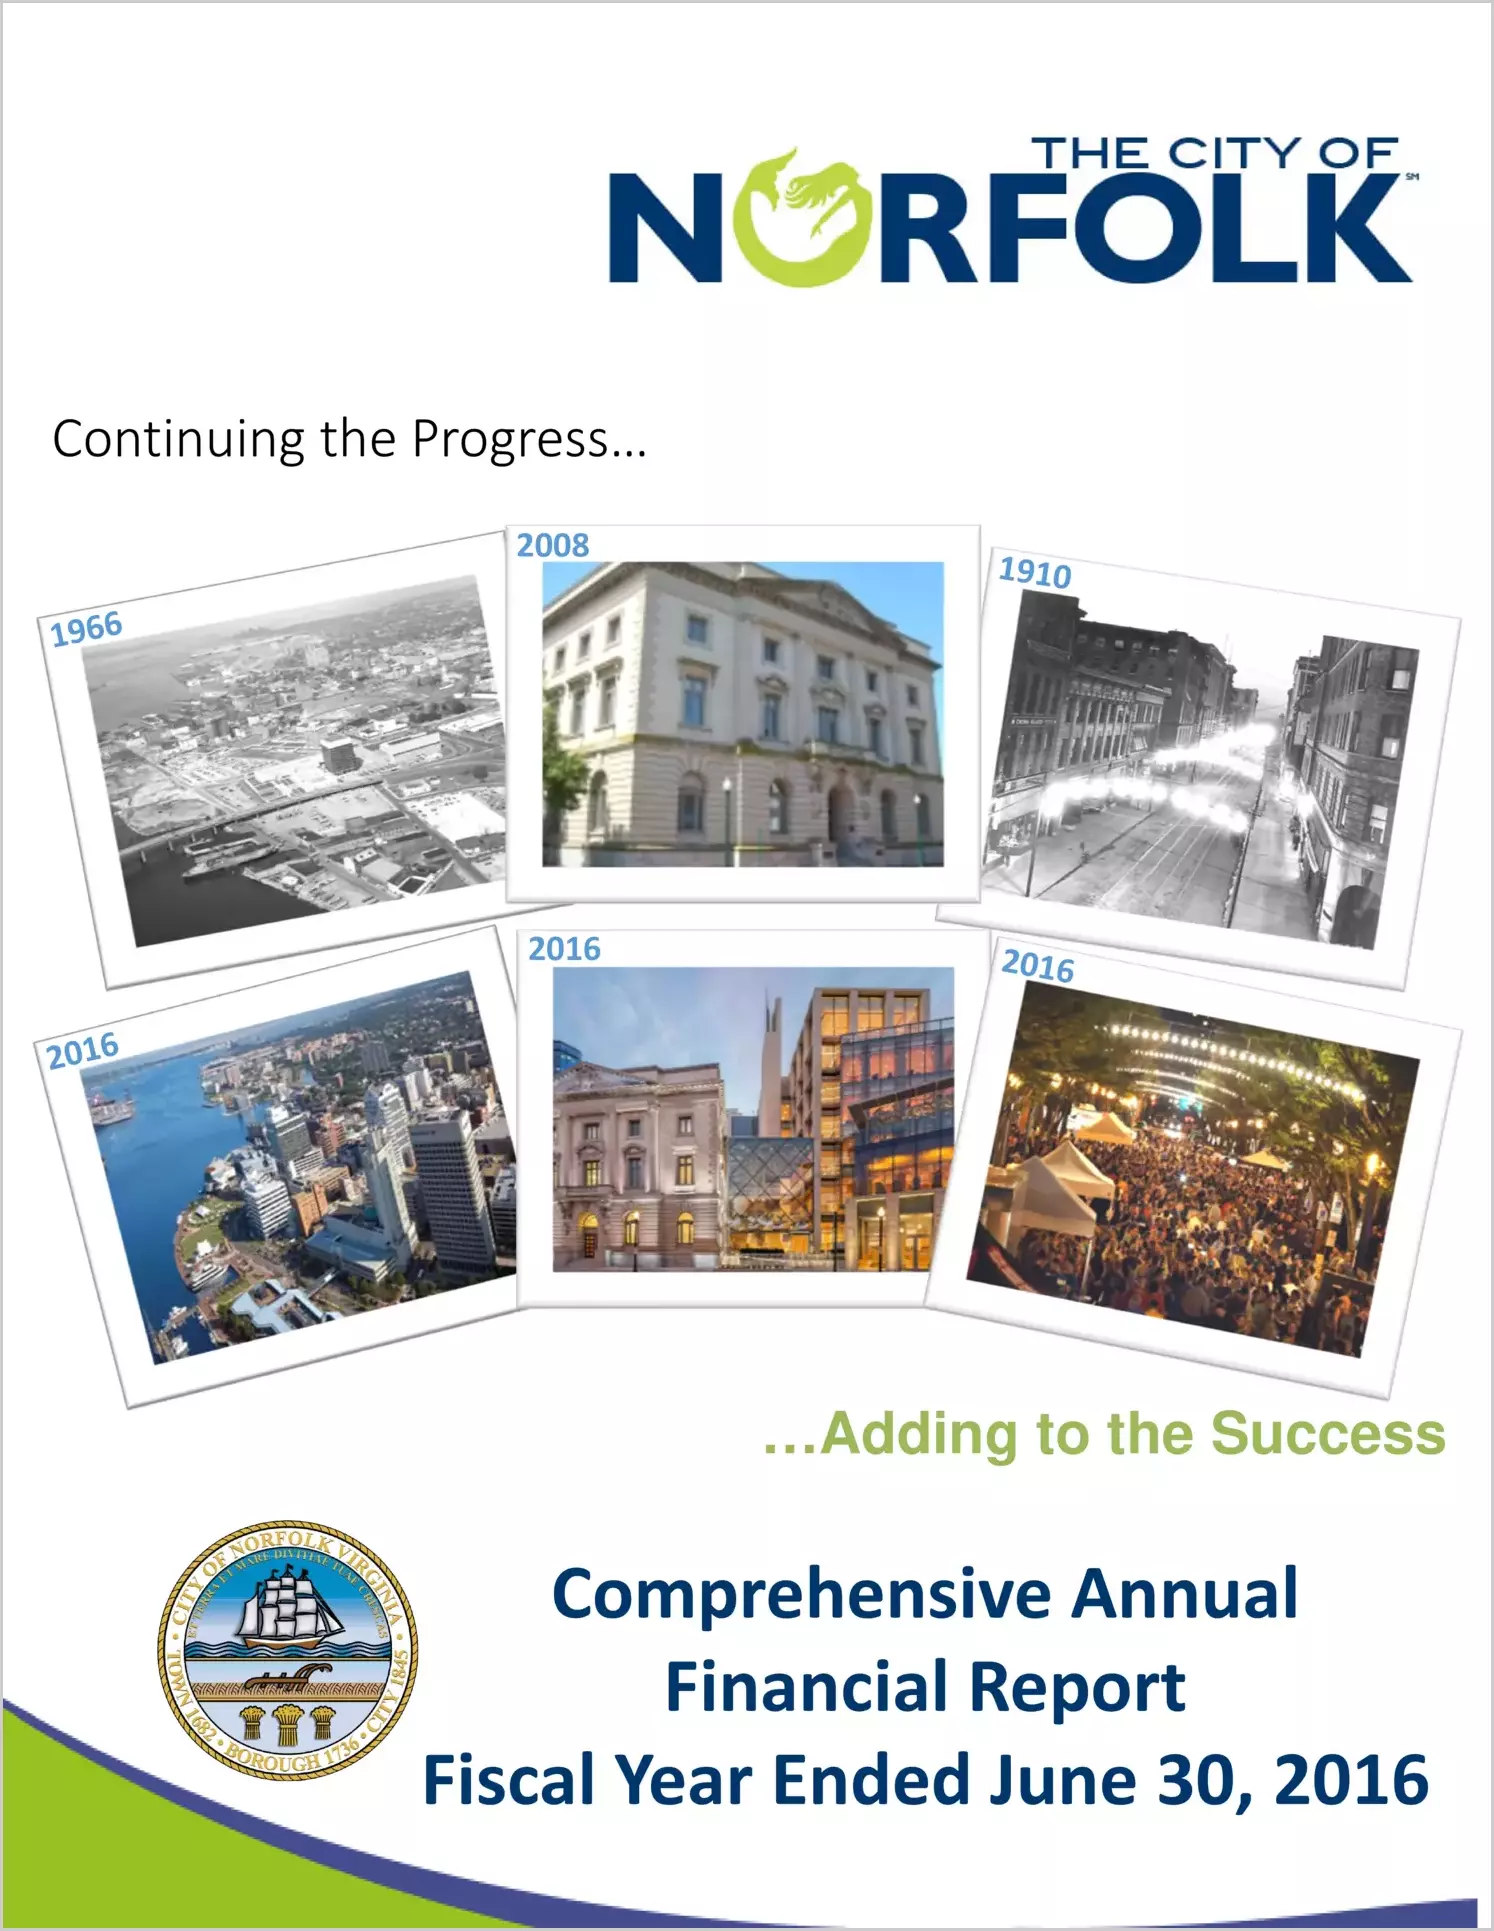 2016 Annual Financial Report for City of Norfolk